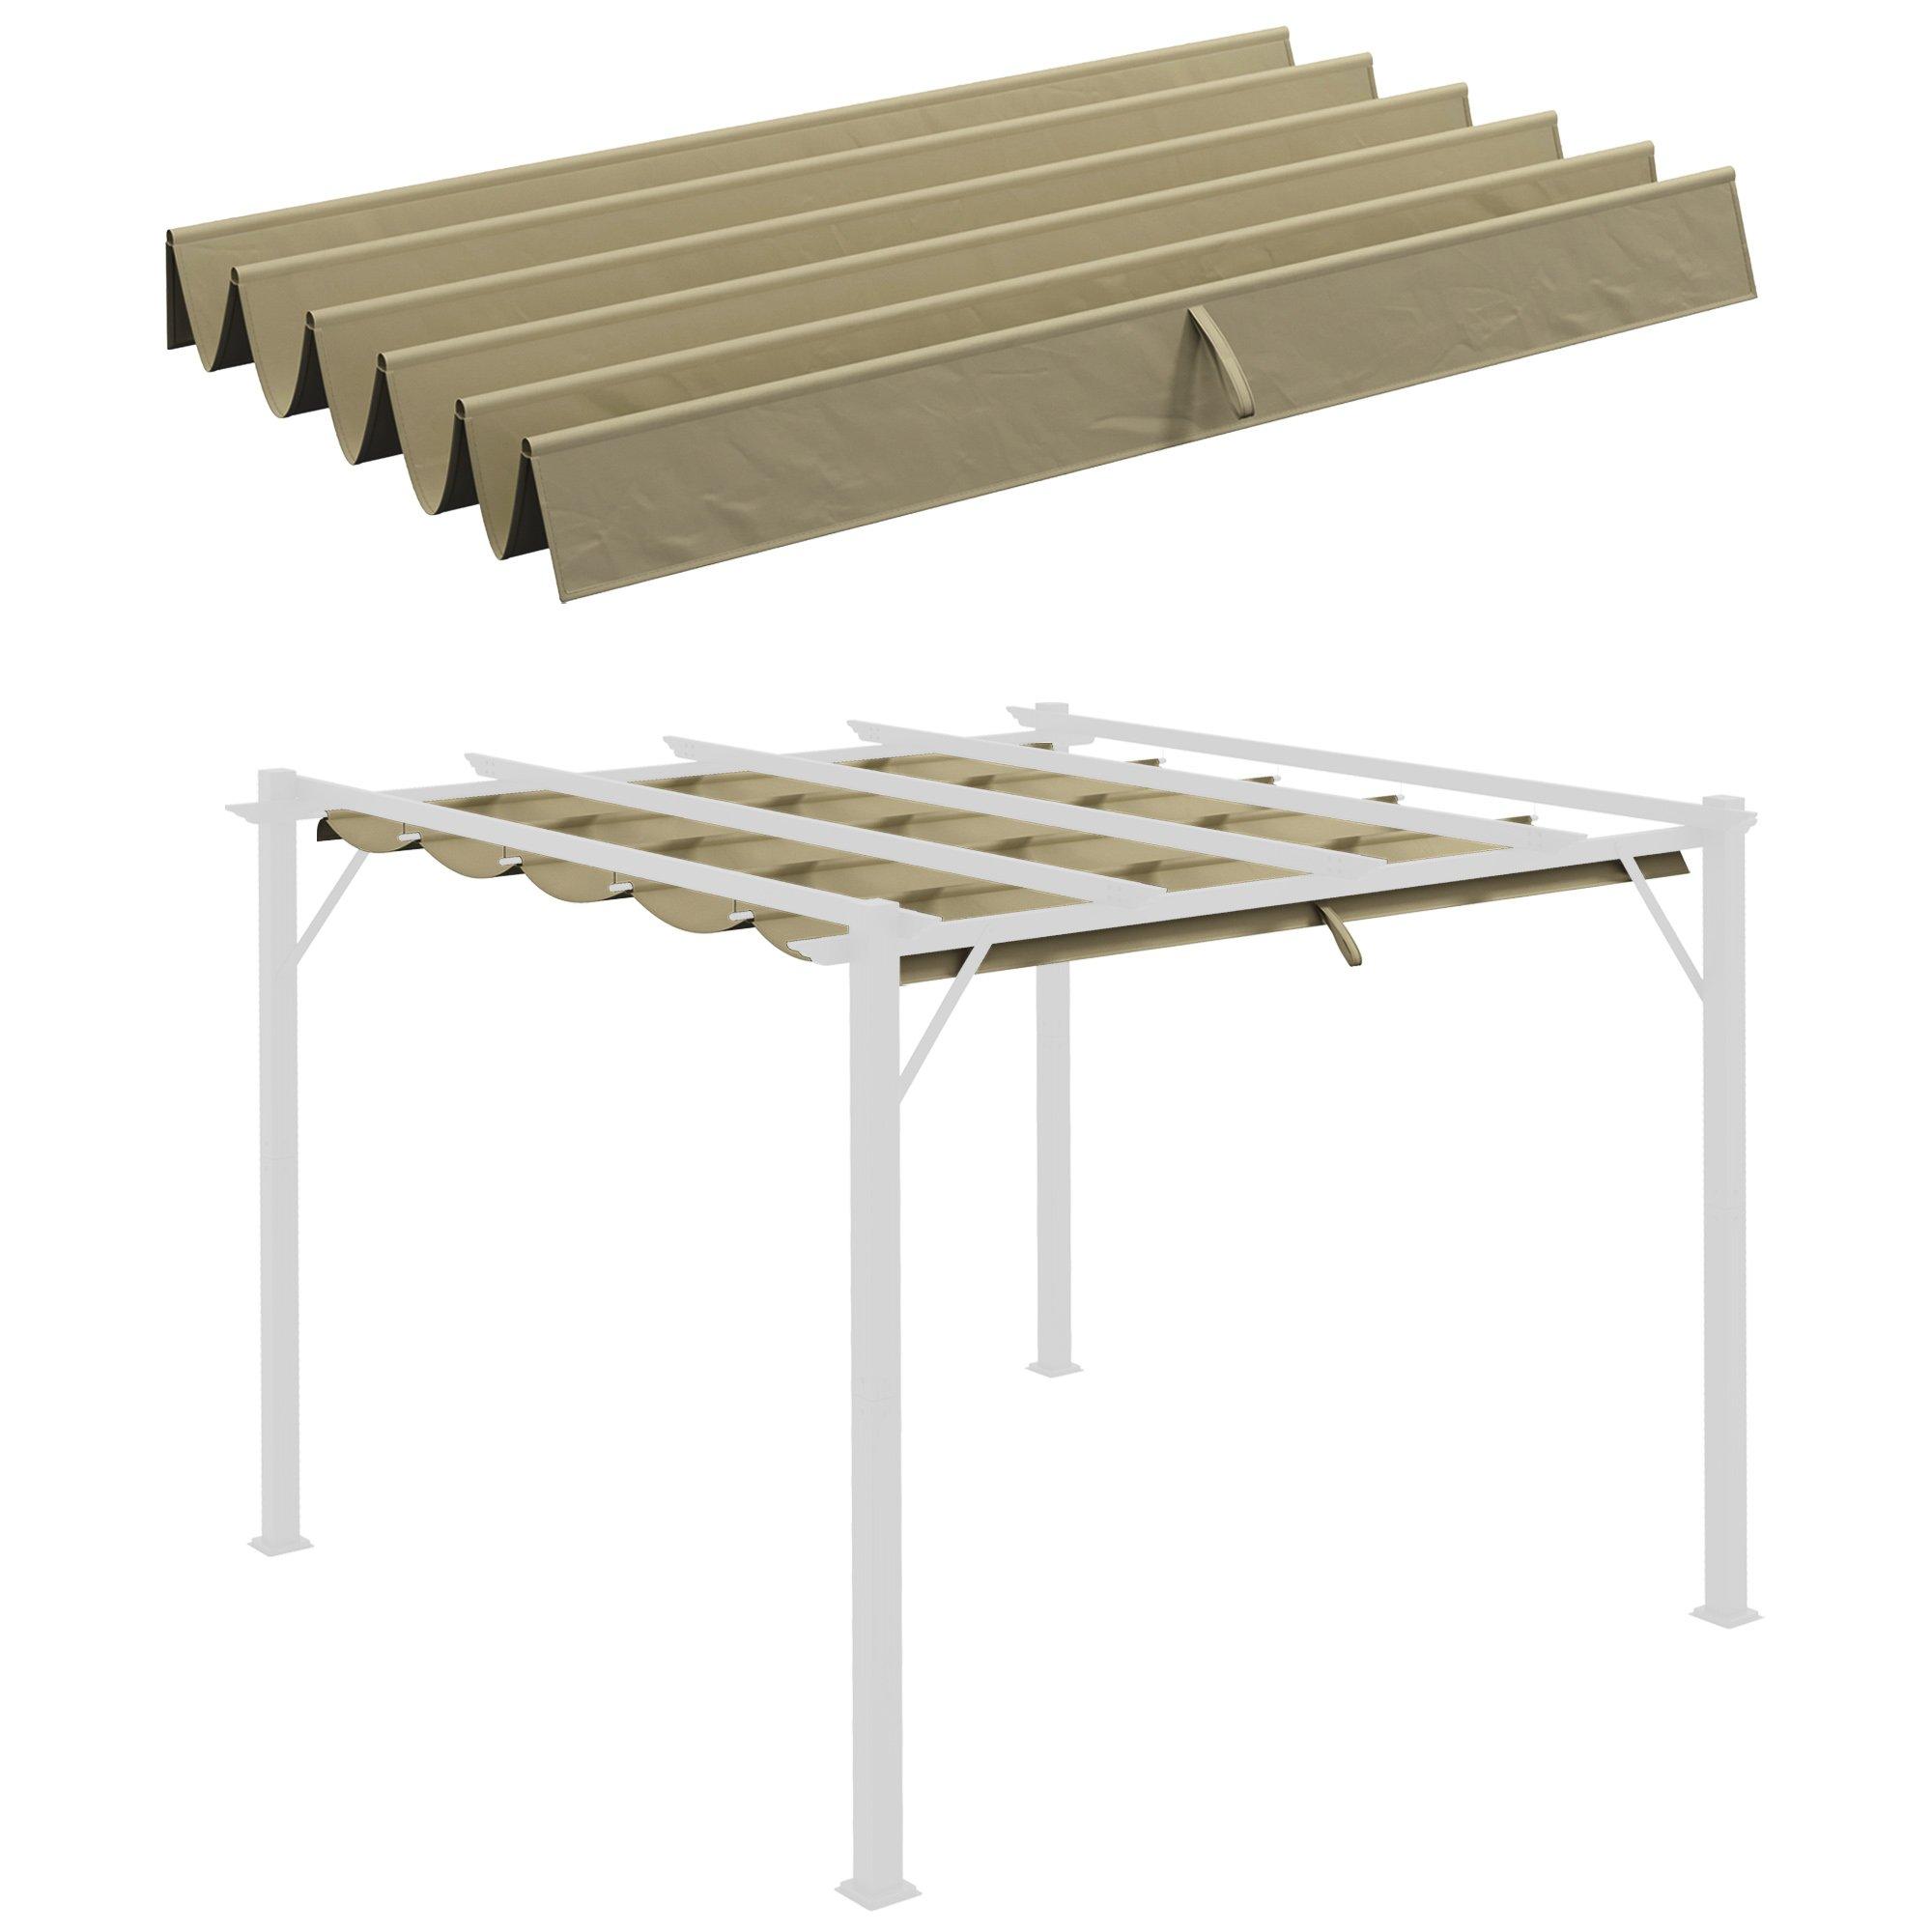 Pergola Shade Cover for 3 x 3m Pergola, Replacement Canopy Fabric Only